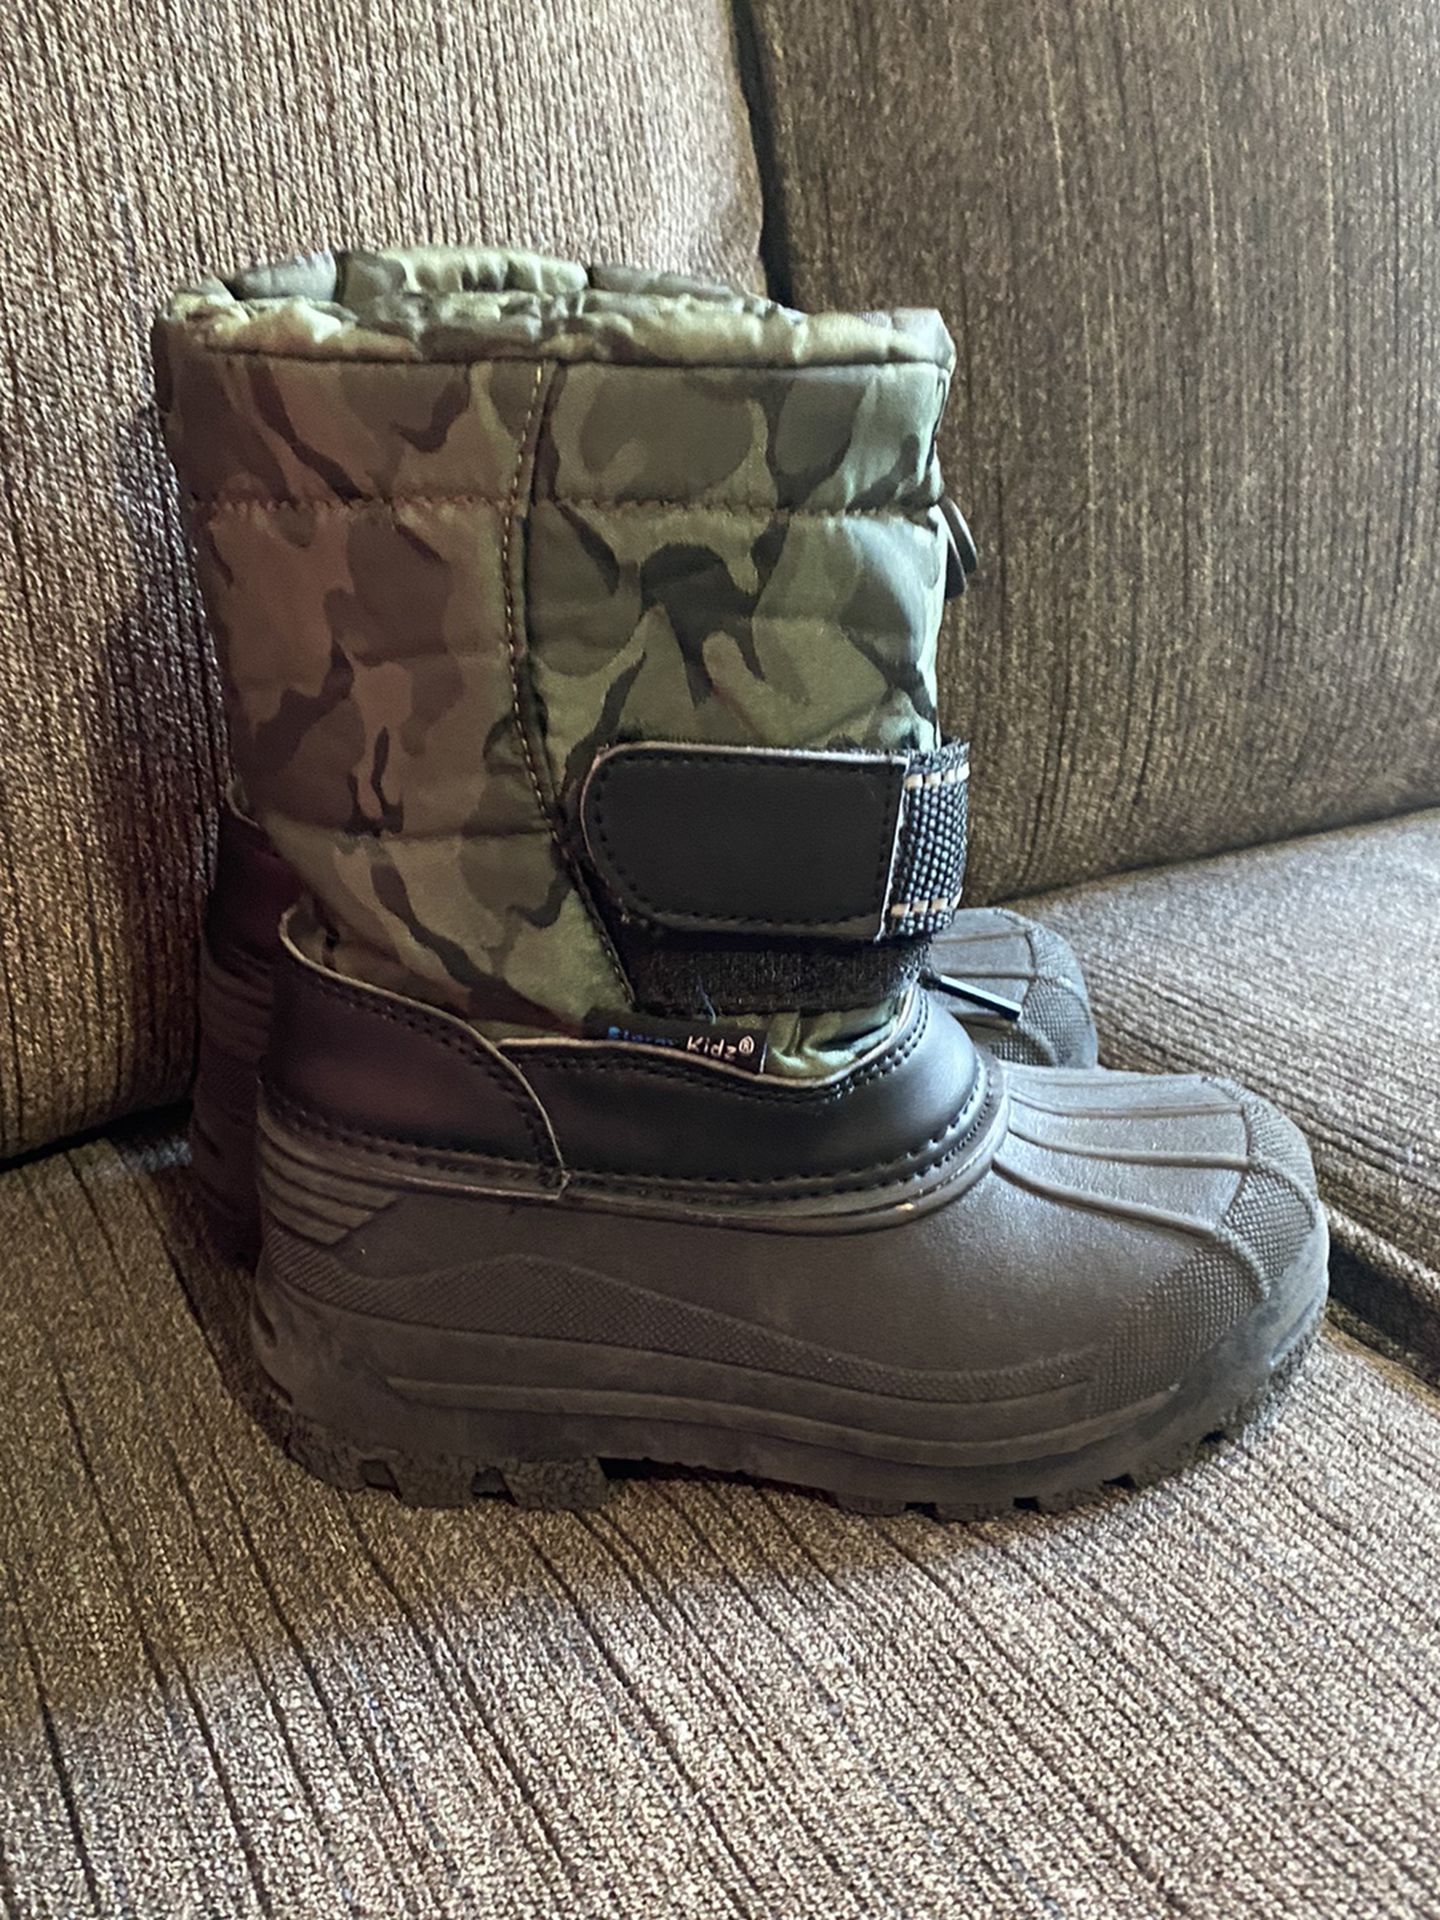 Toddler Size 9 Snow Boots Good For Boy Girl